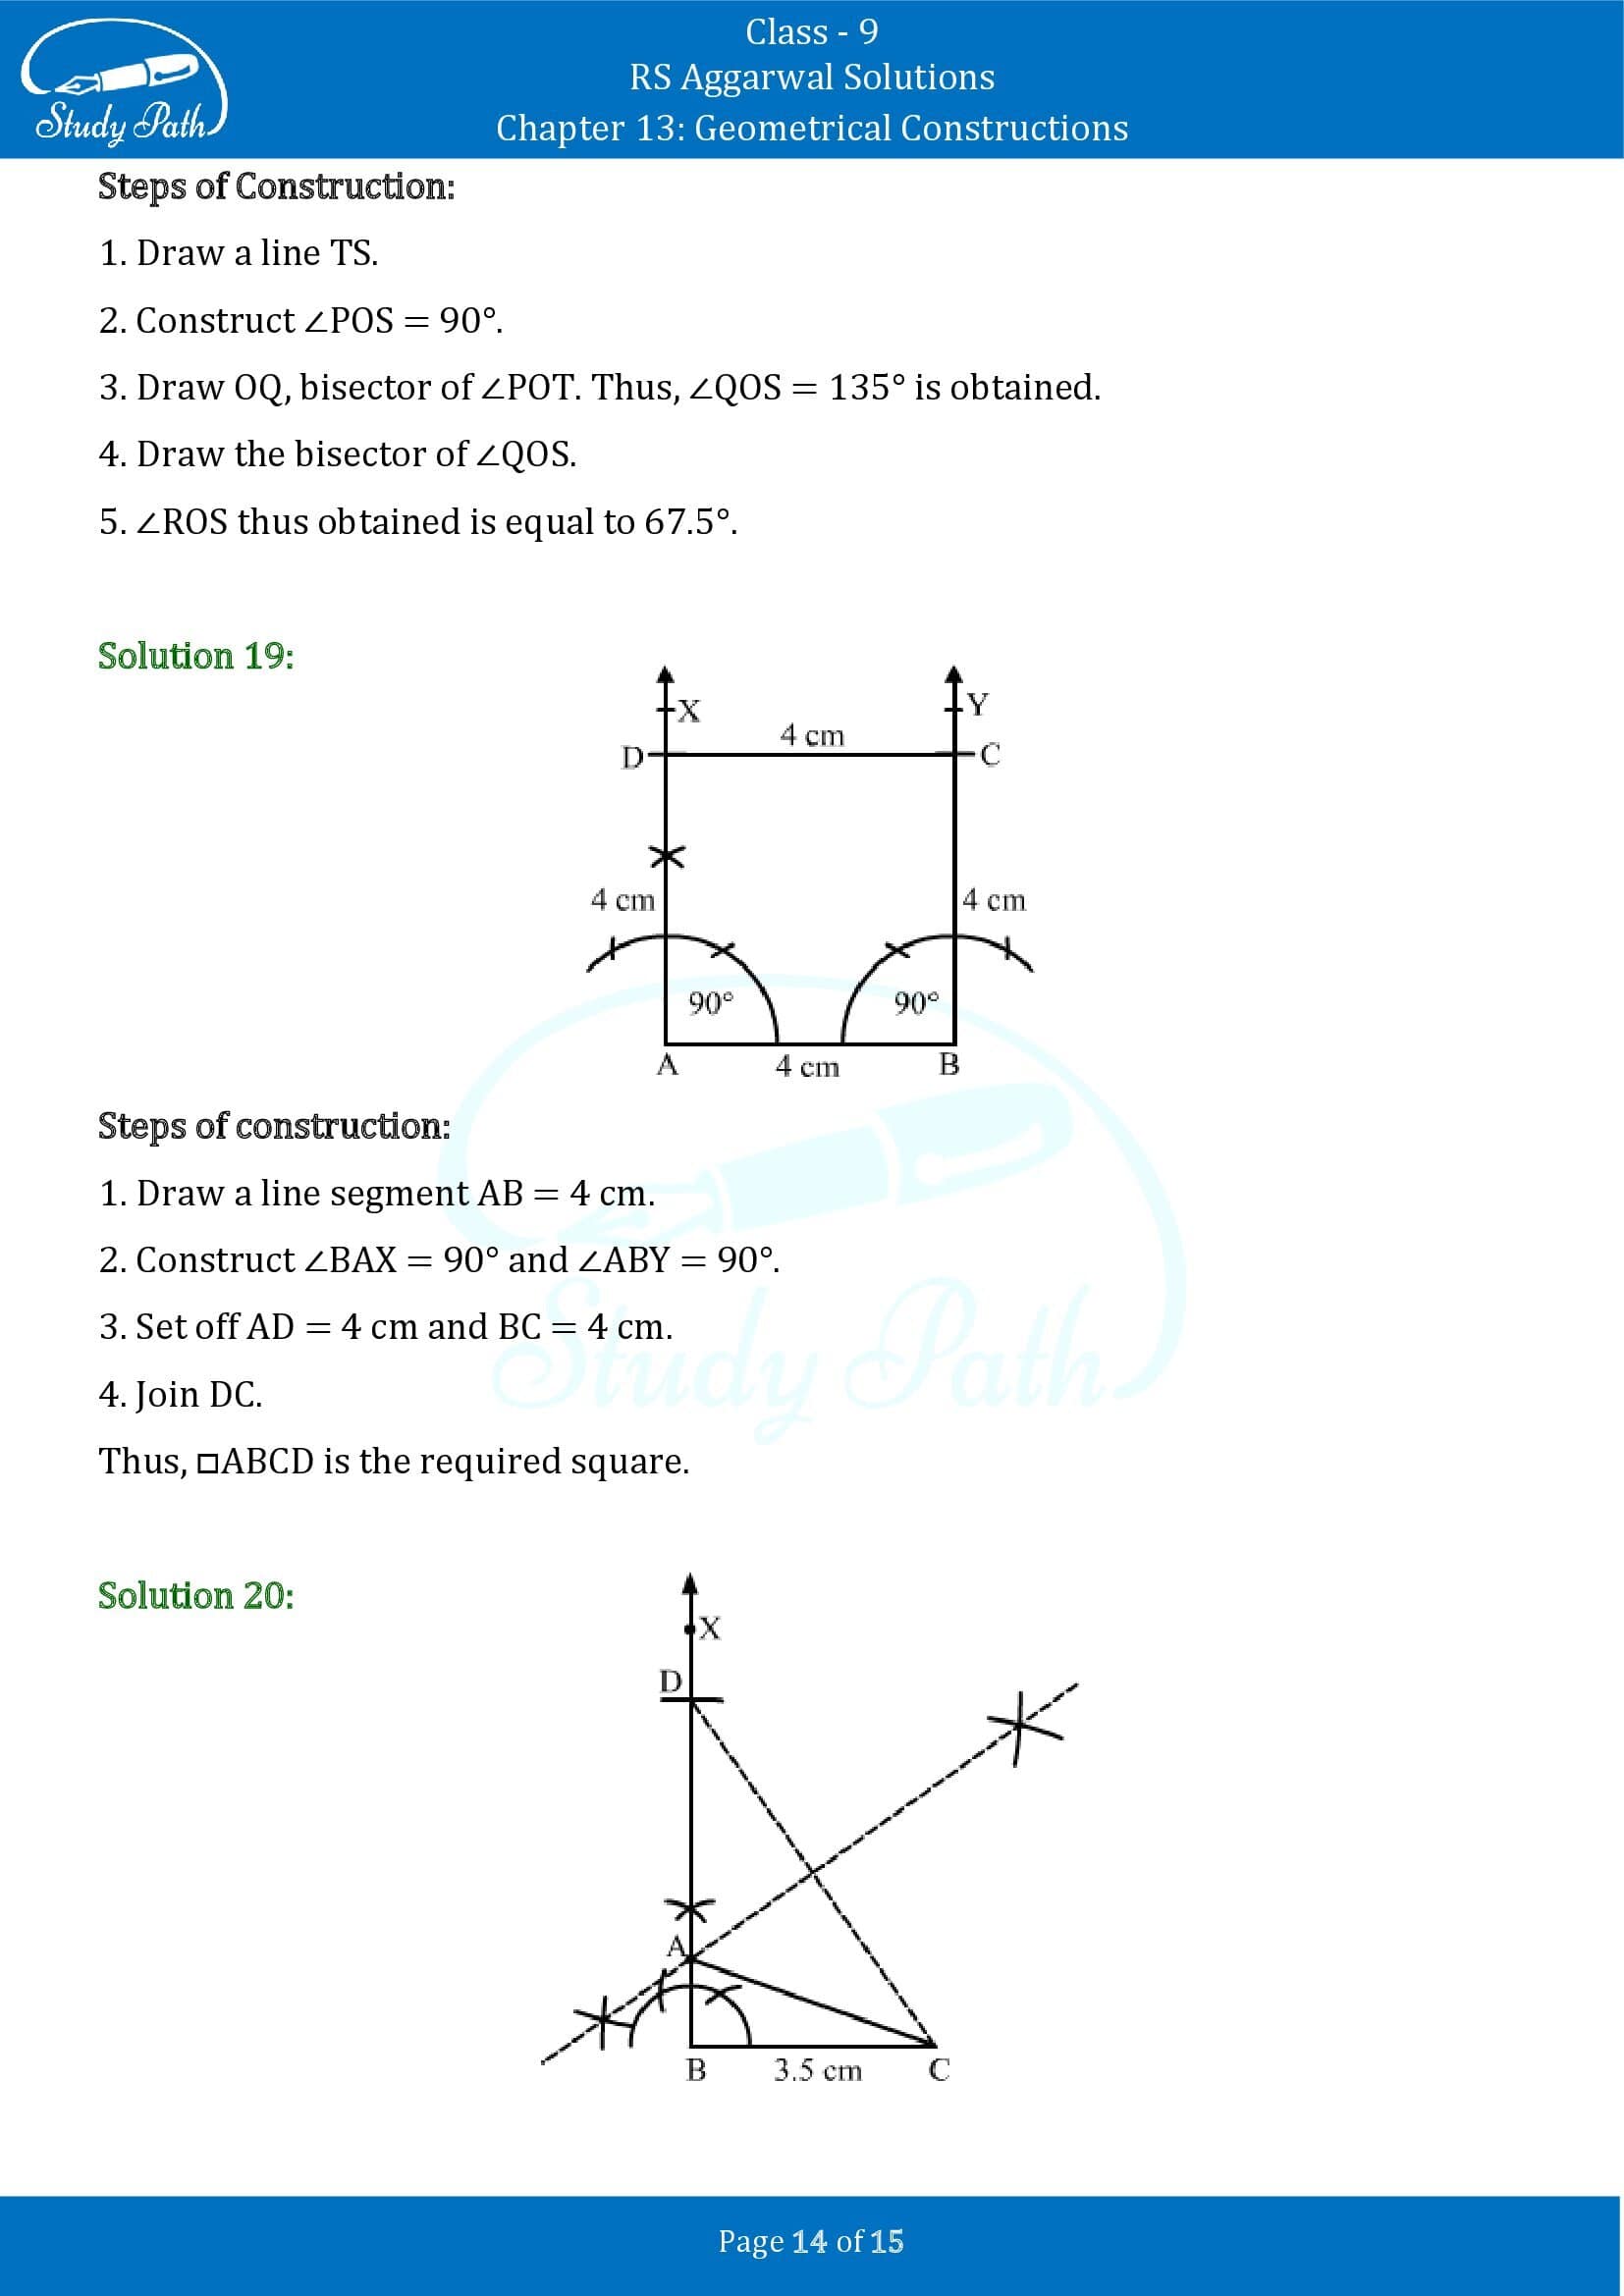 RS Aggarwal Solutions Class 9 Chapter 13 Geometrical Constructions 14